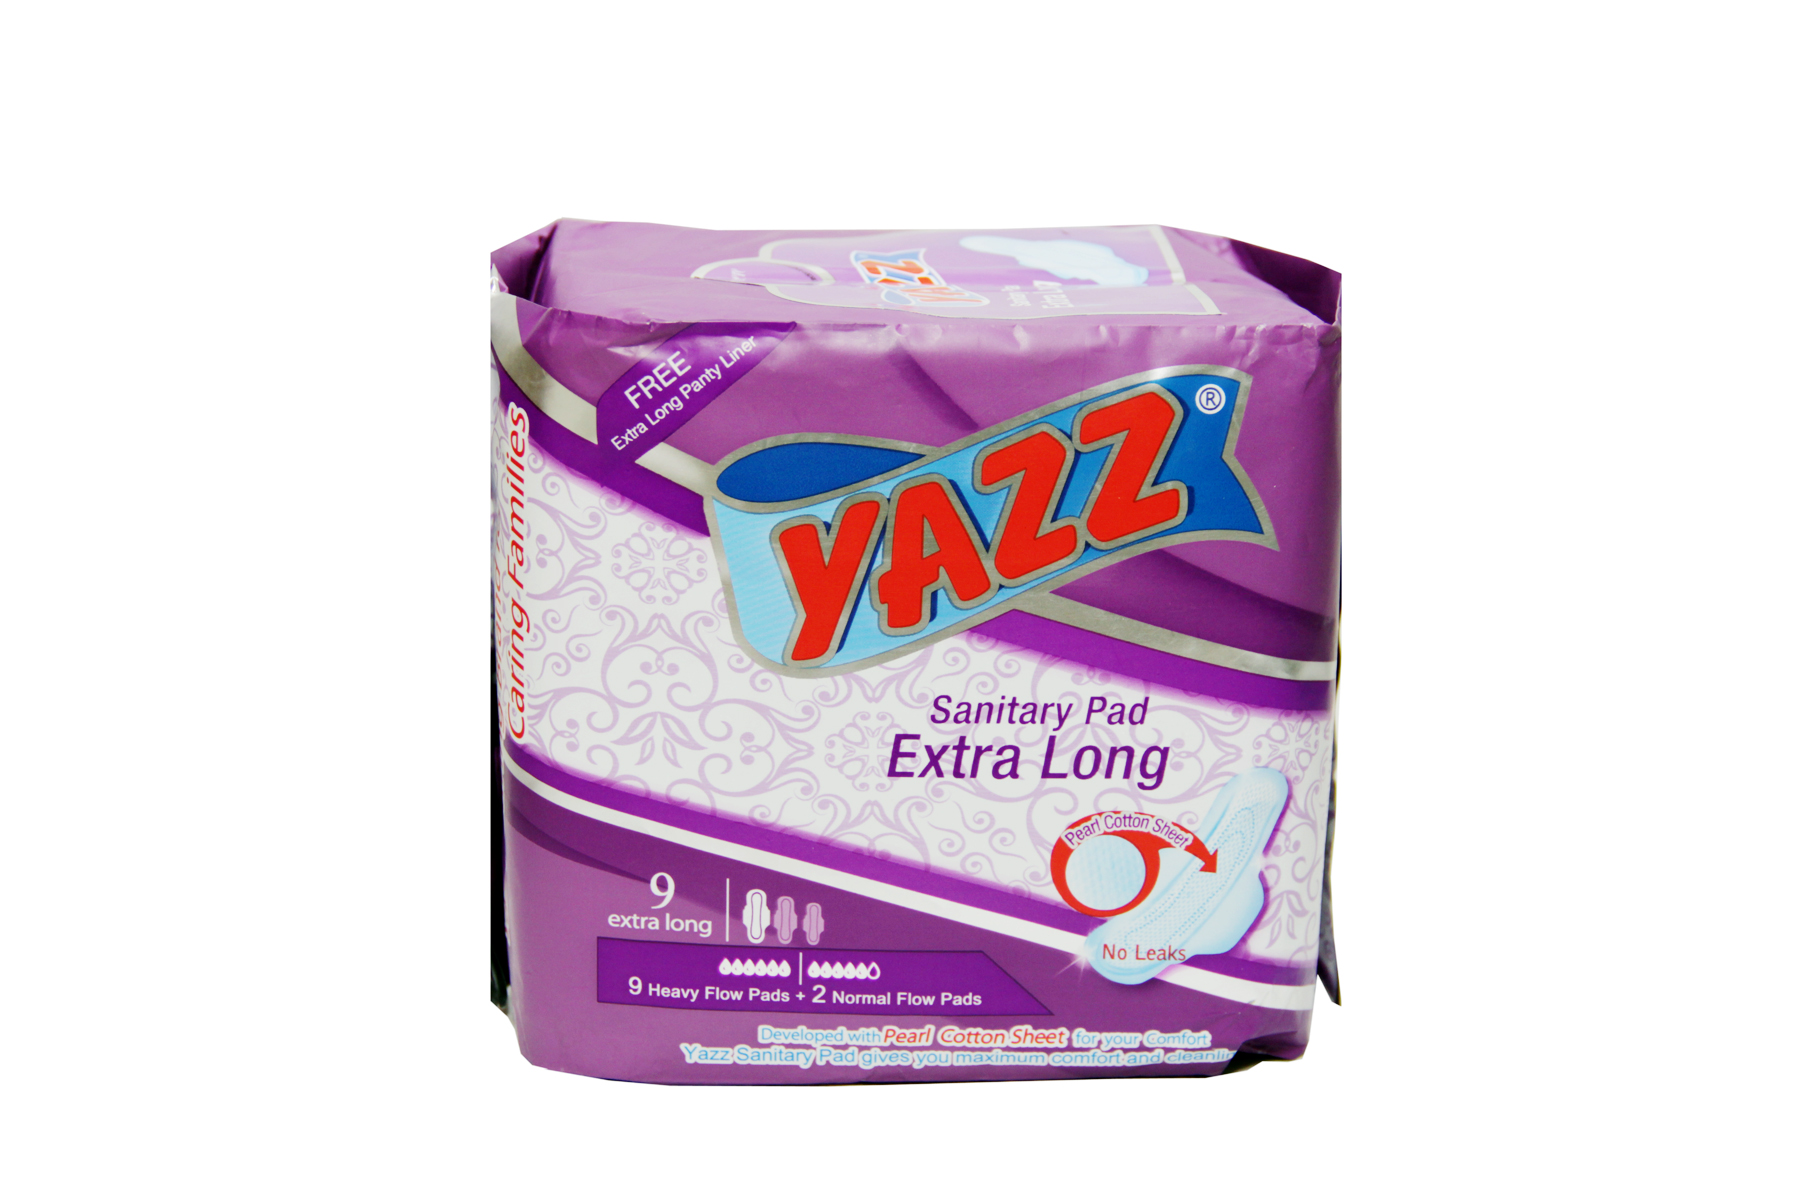 Yazz Extra Long Sanitary Pad, Yazz Products